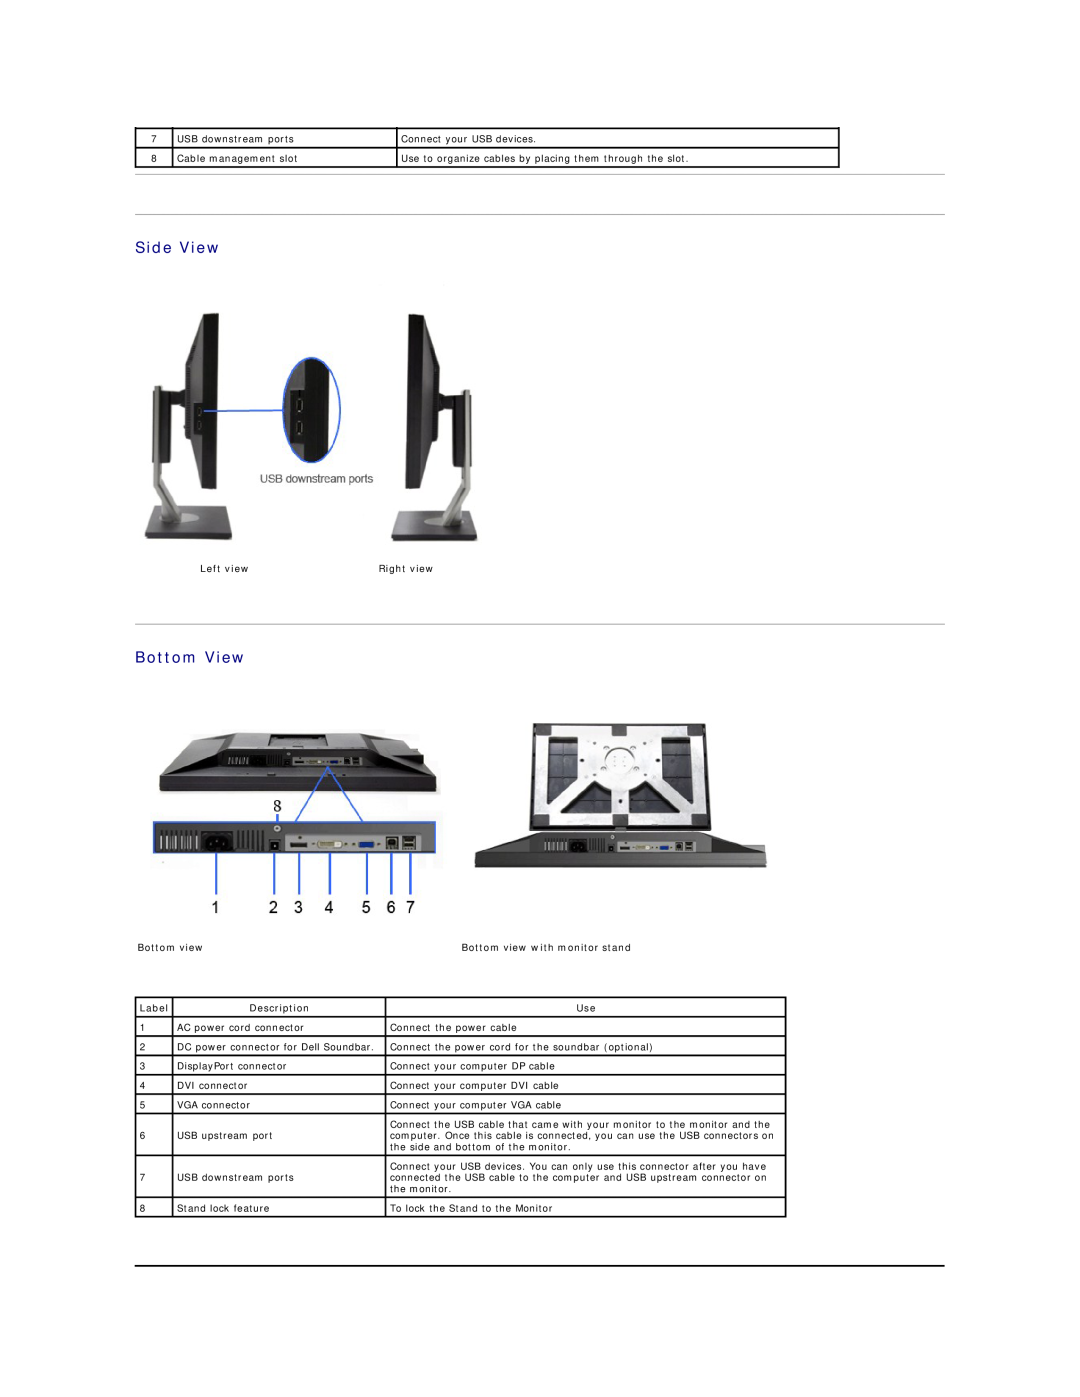 Dell U2211H, U2311H Side View, Bottom View, Left view, Right view, Bottom view with monitor stand, Label, Description 